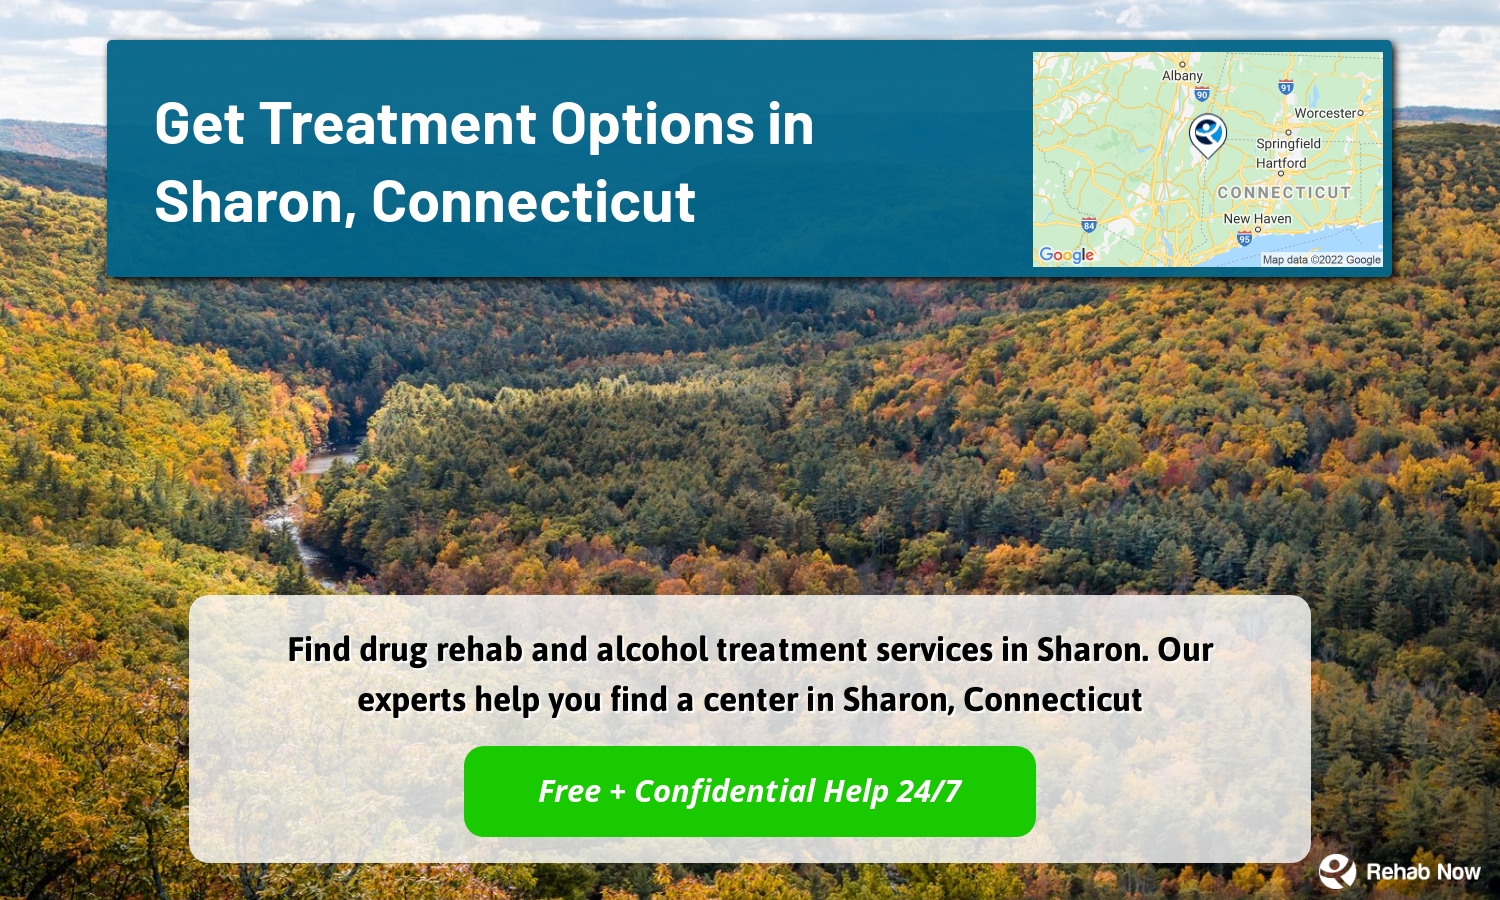 Find drug rehab and alcohol treatment services in Sharon. Our experts help you find a center in Sharon, Connecticut